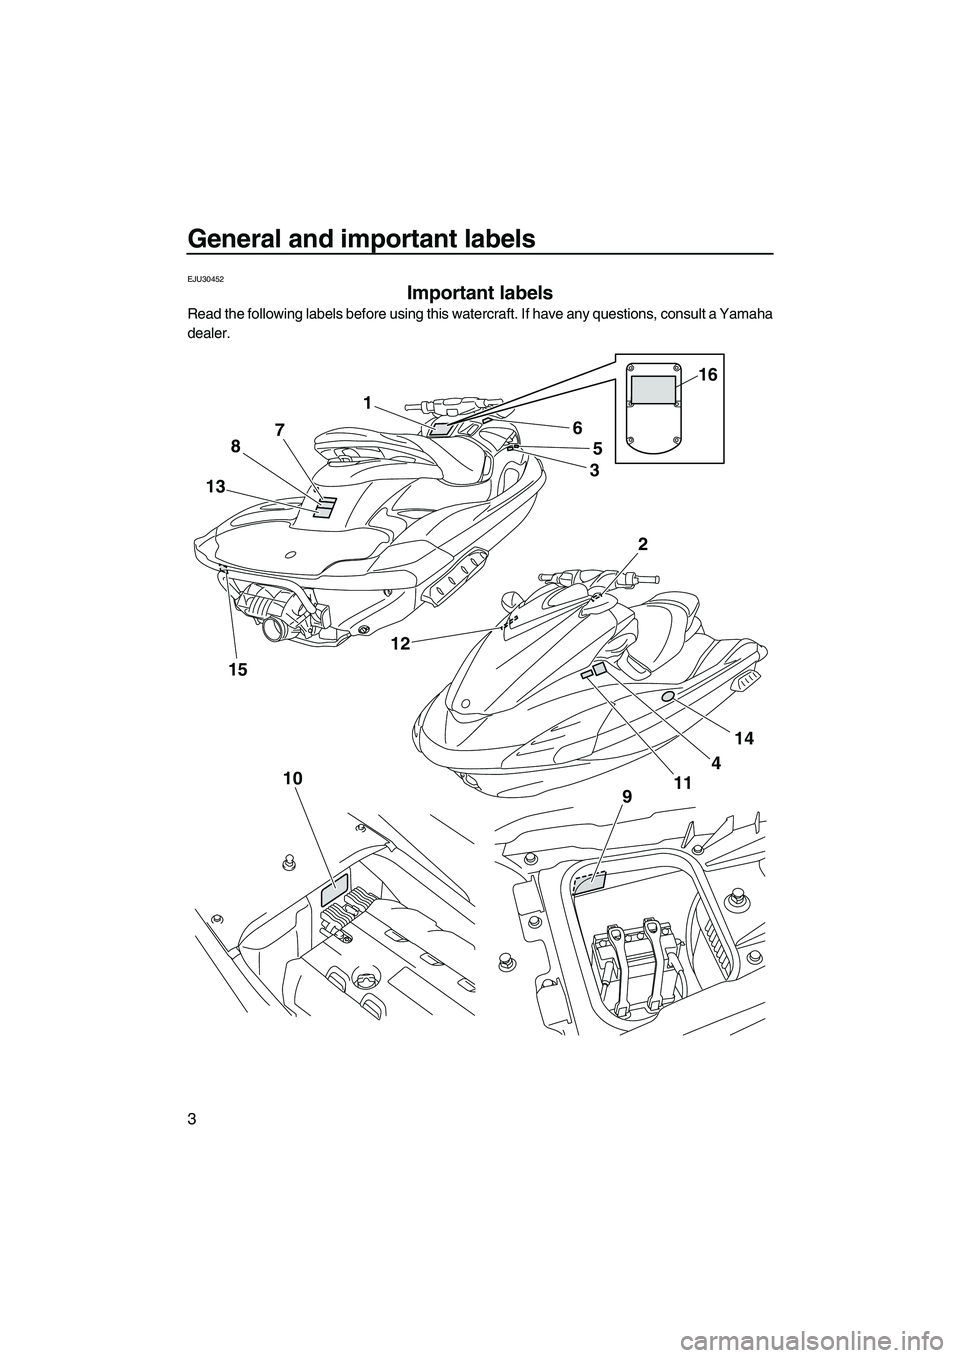 YAMAHA FZS 2010  Owners Manual General and important labels
3
EJU30452
Important labels 
Read the following labels before using this watercraft. If have any questions, consult a Yamaha
dealer.
1
5
3
4
11 6
87
13
1512
14
2
9 10
16
U